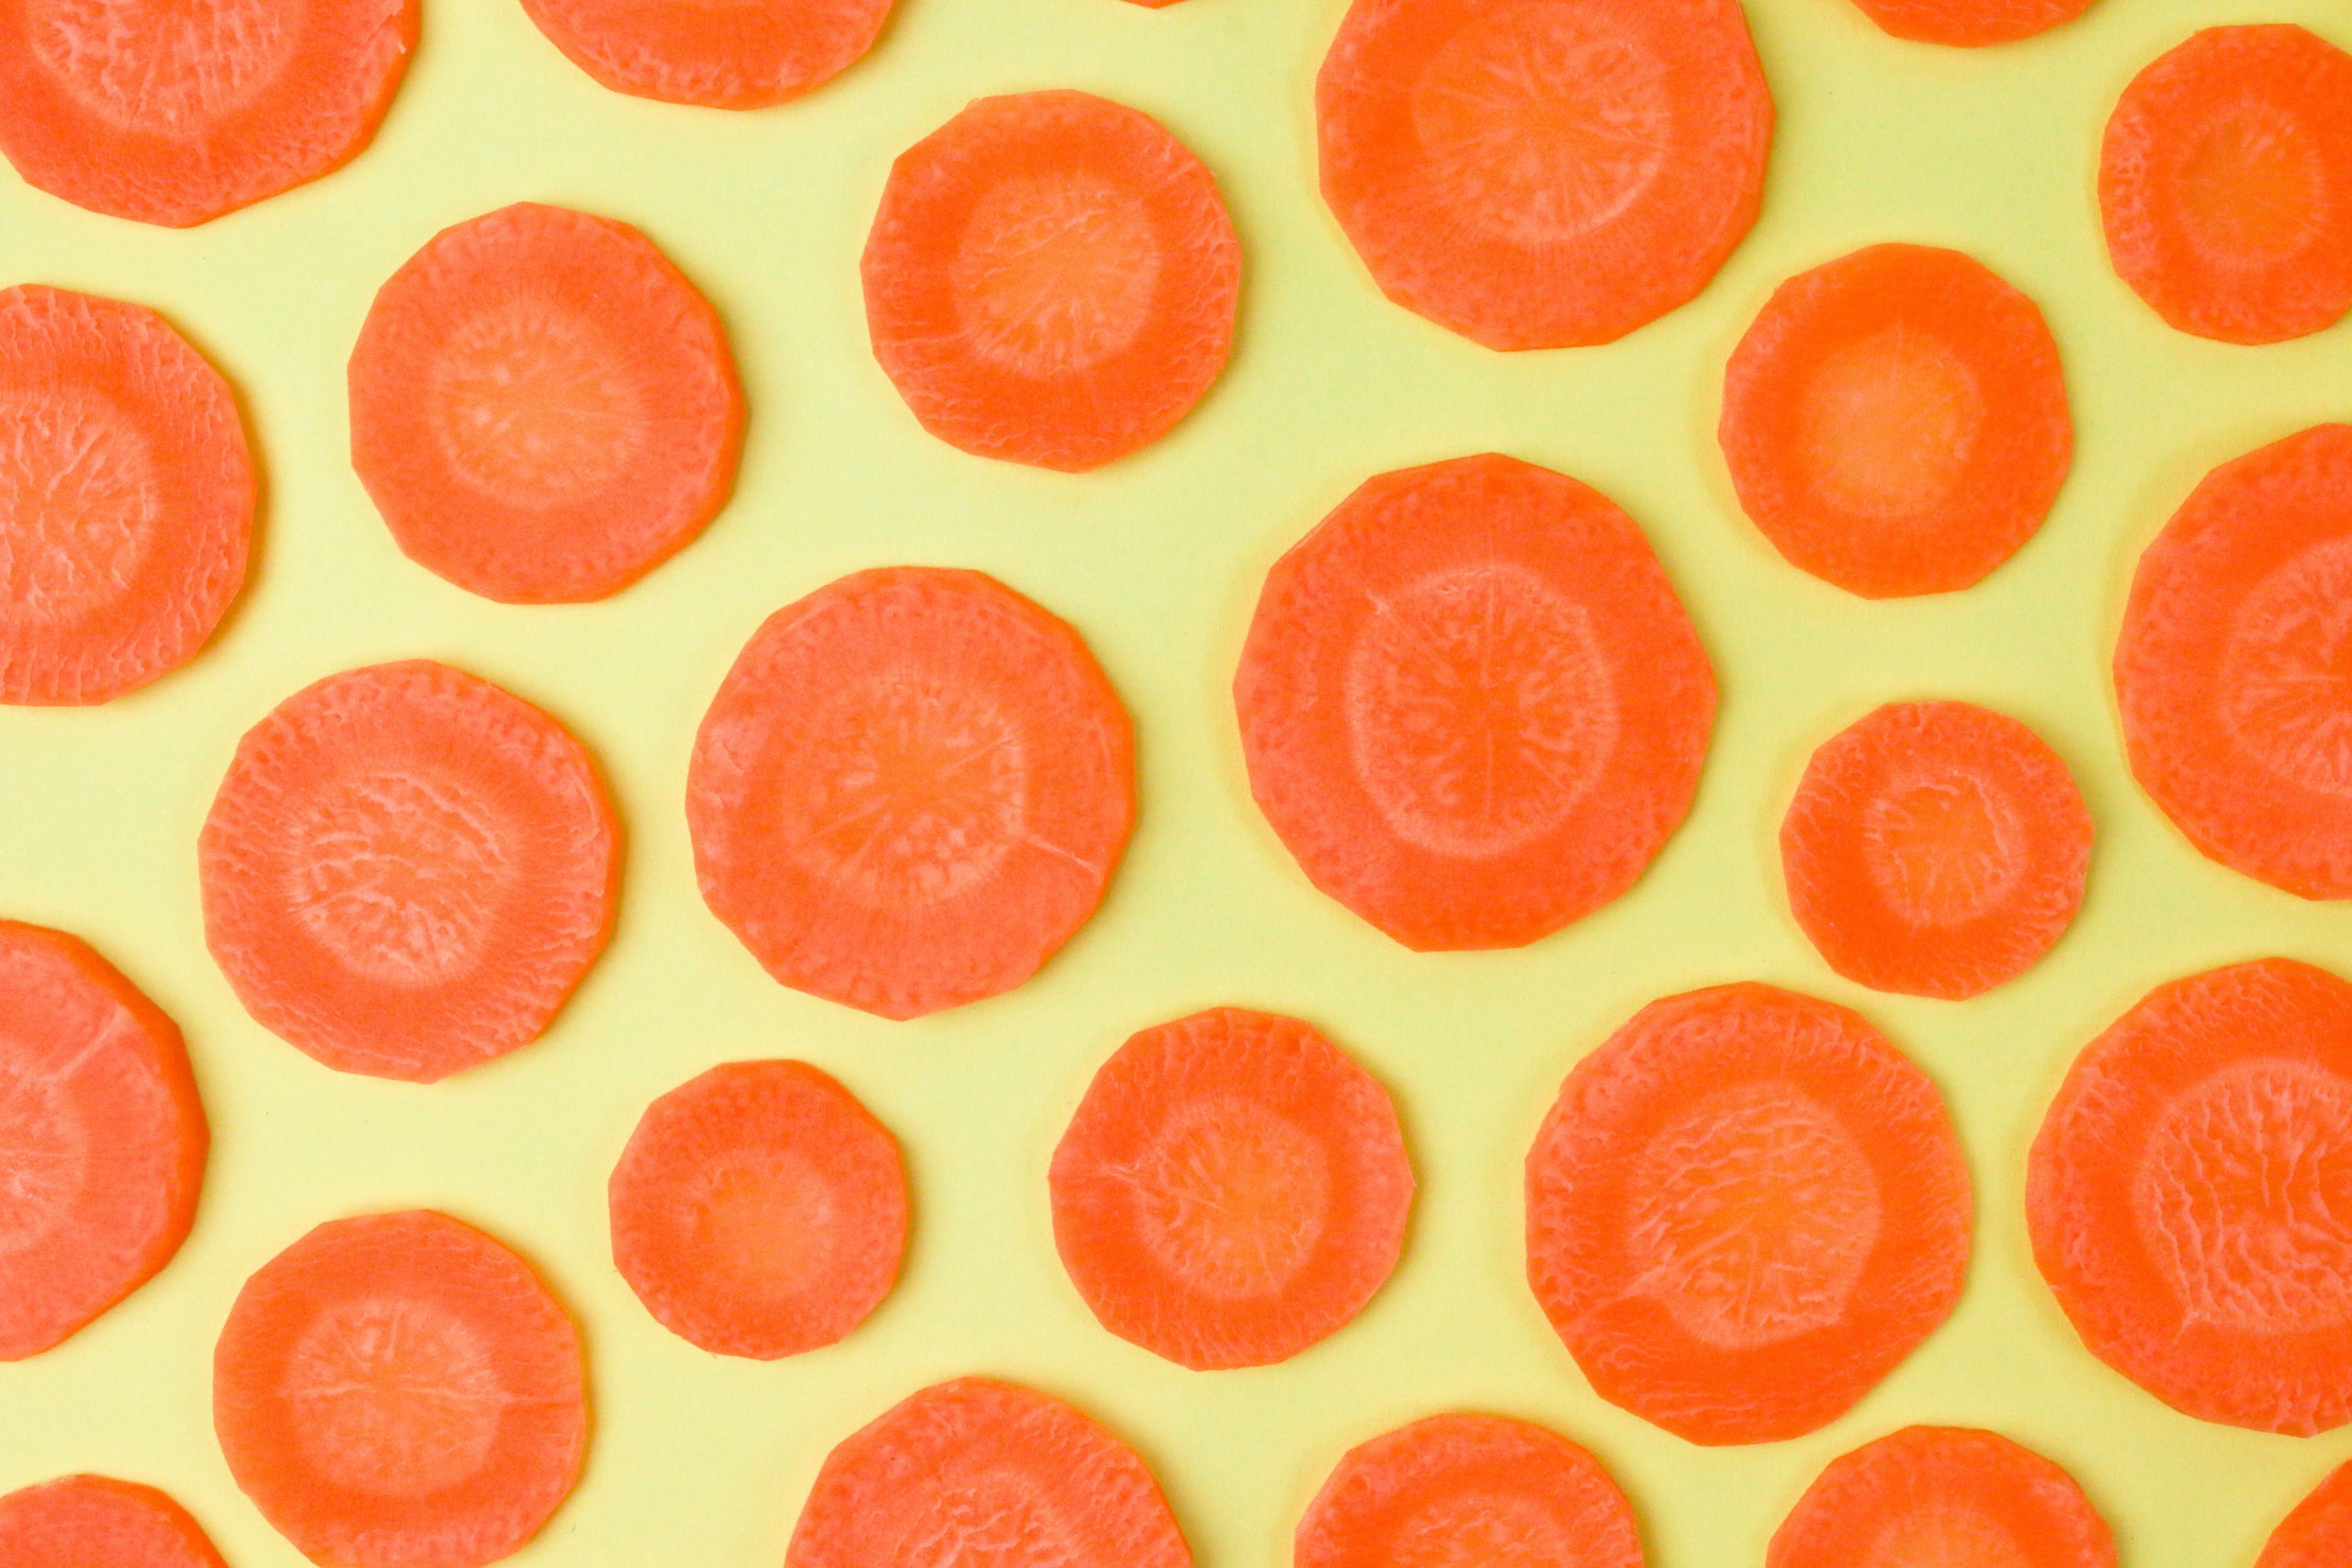 Carrot slices on a yellow table